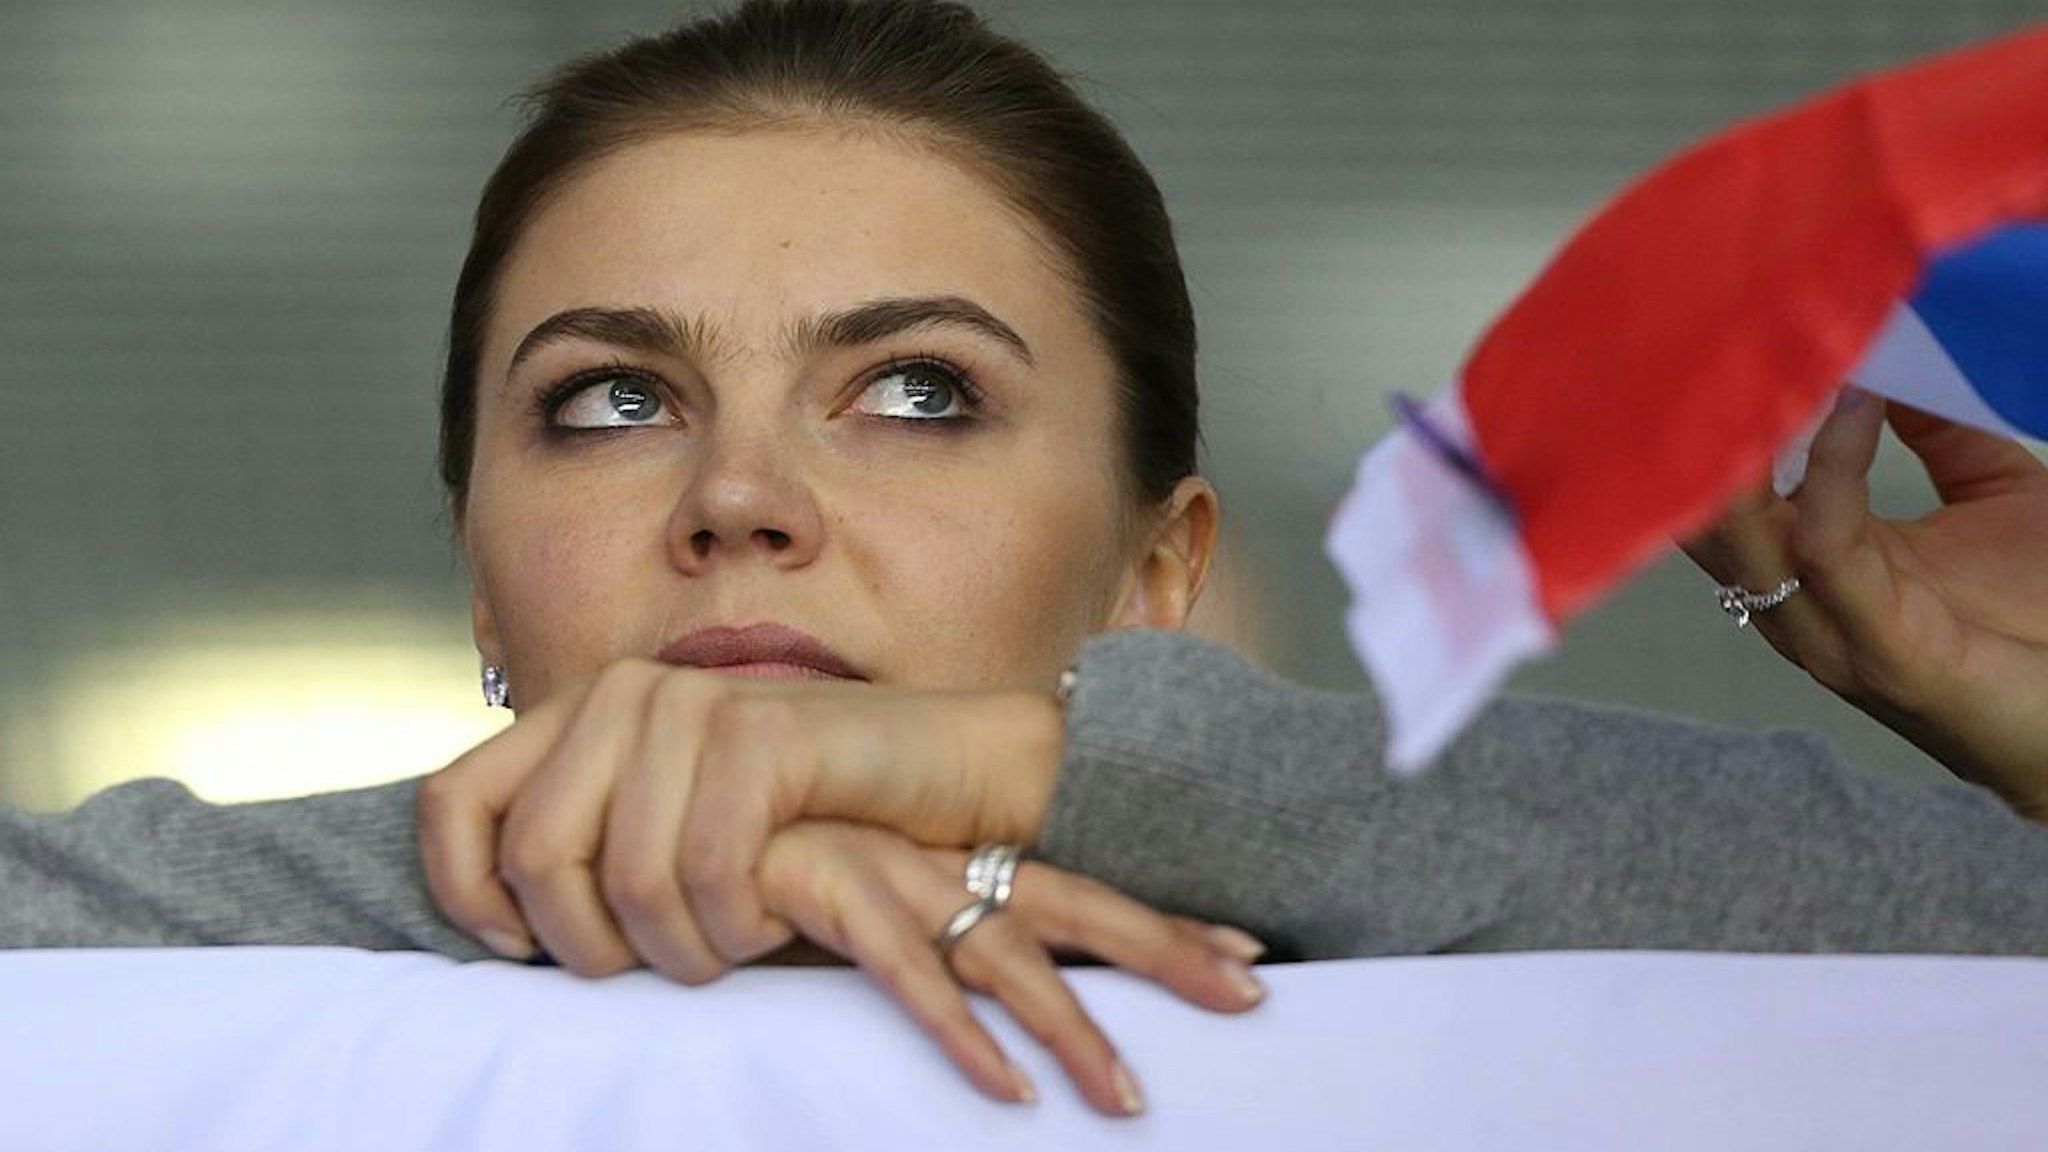 Alina Kabaeva, Russian Olympic gymnastics champion and reputed girlfriend of President Vladimir Putin, was among those sanctioned by the UK Friday.